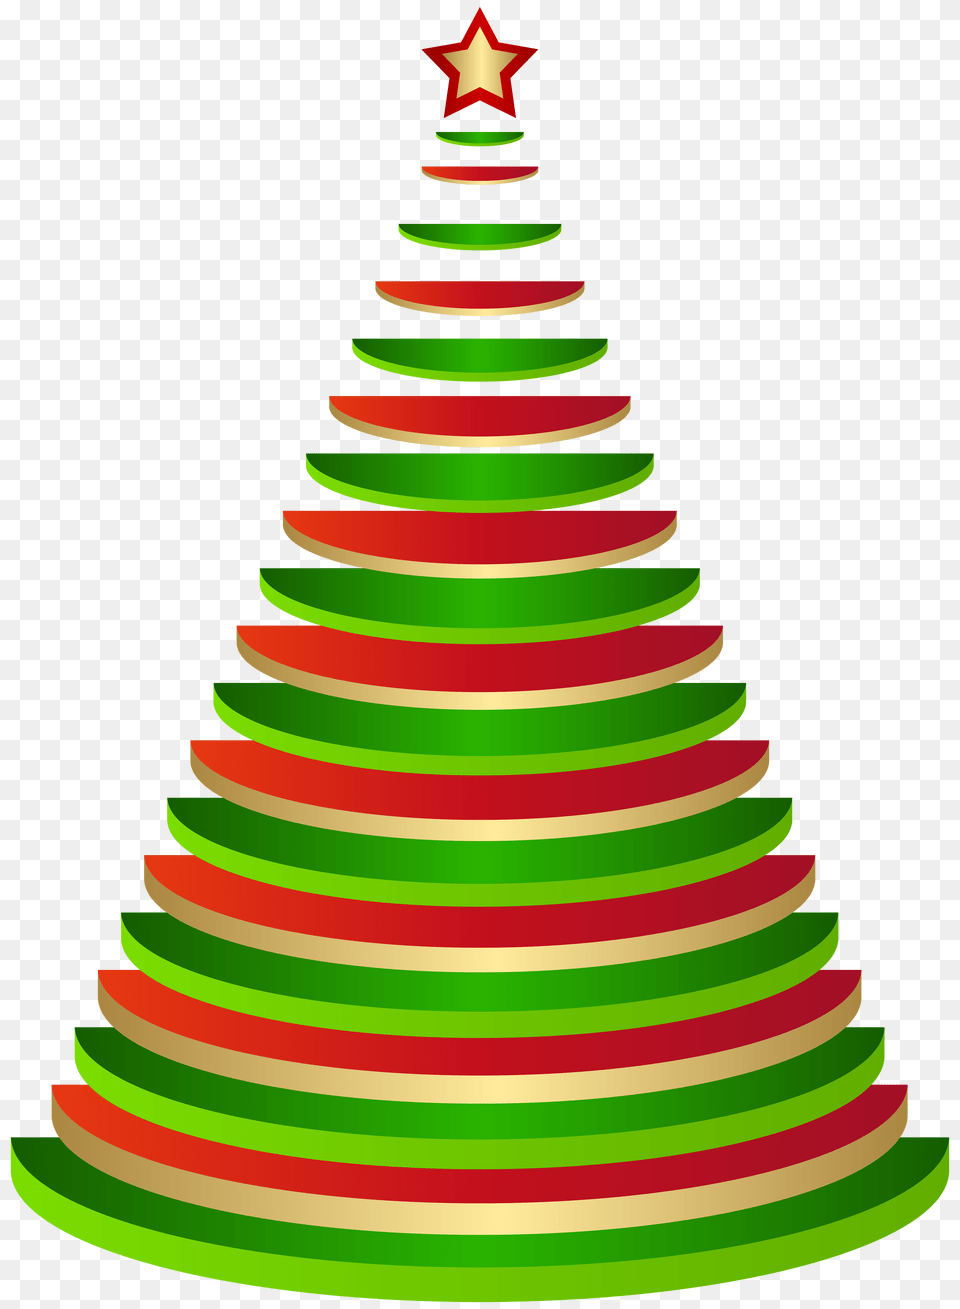 Decorative Christmas Tree Clip, Clothing, Hat, Dynamite, Weapon Png